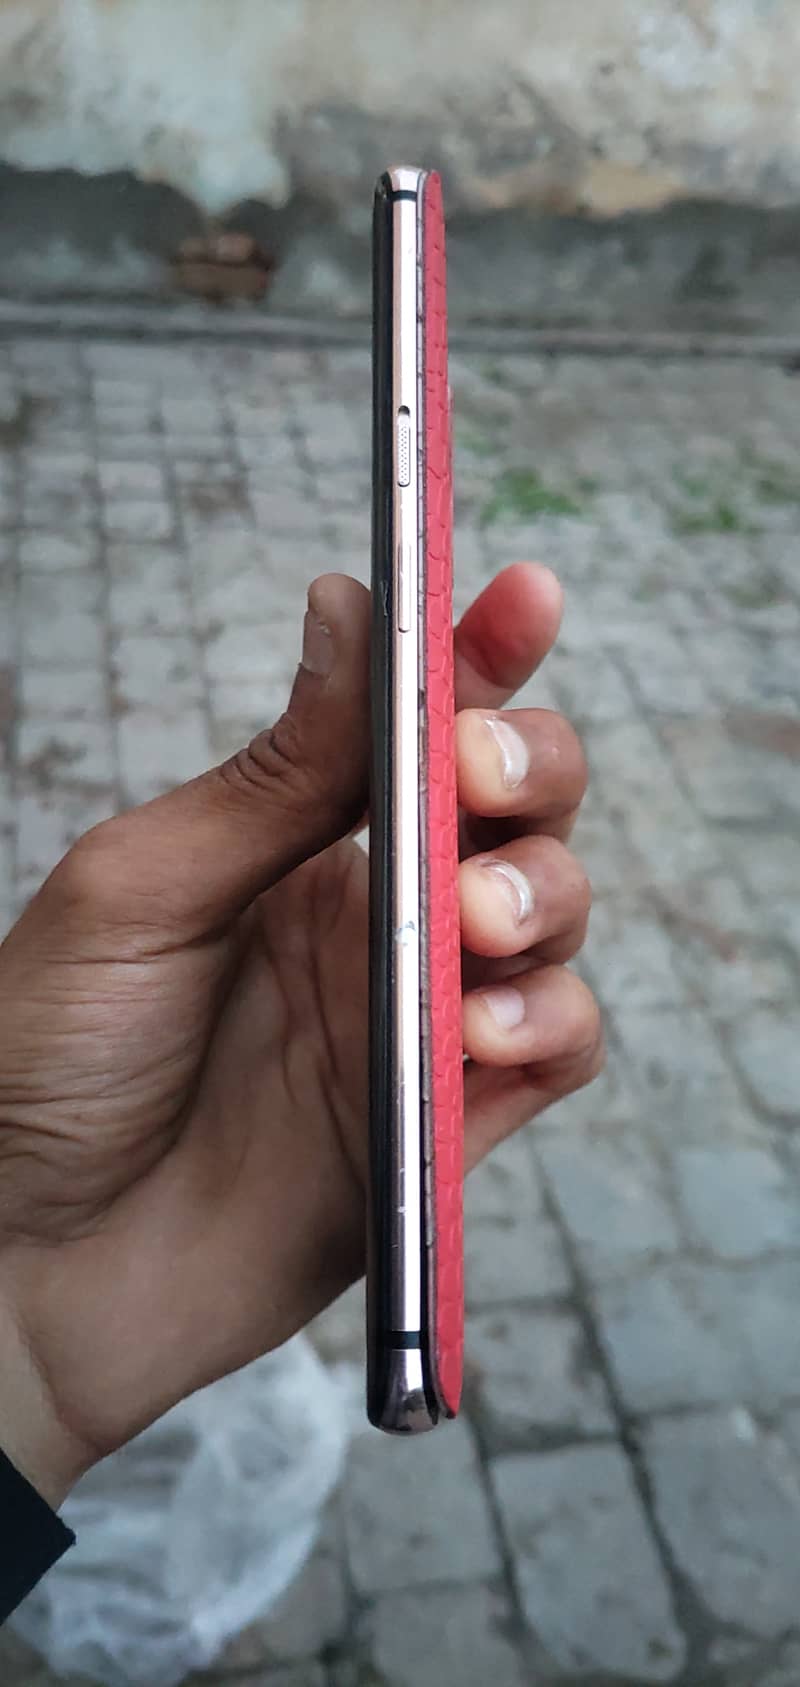 Oneplus 7pro he (baord and battery dad) display and baqi cheze ok he 4